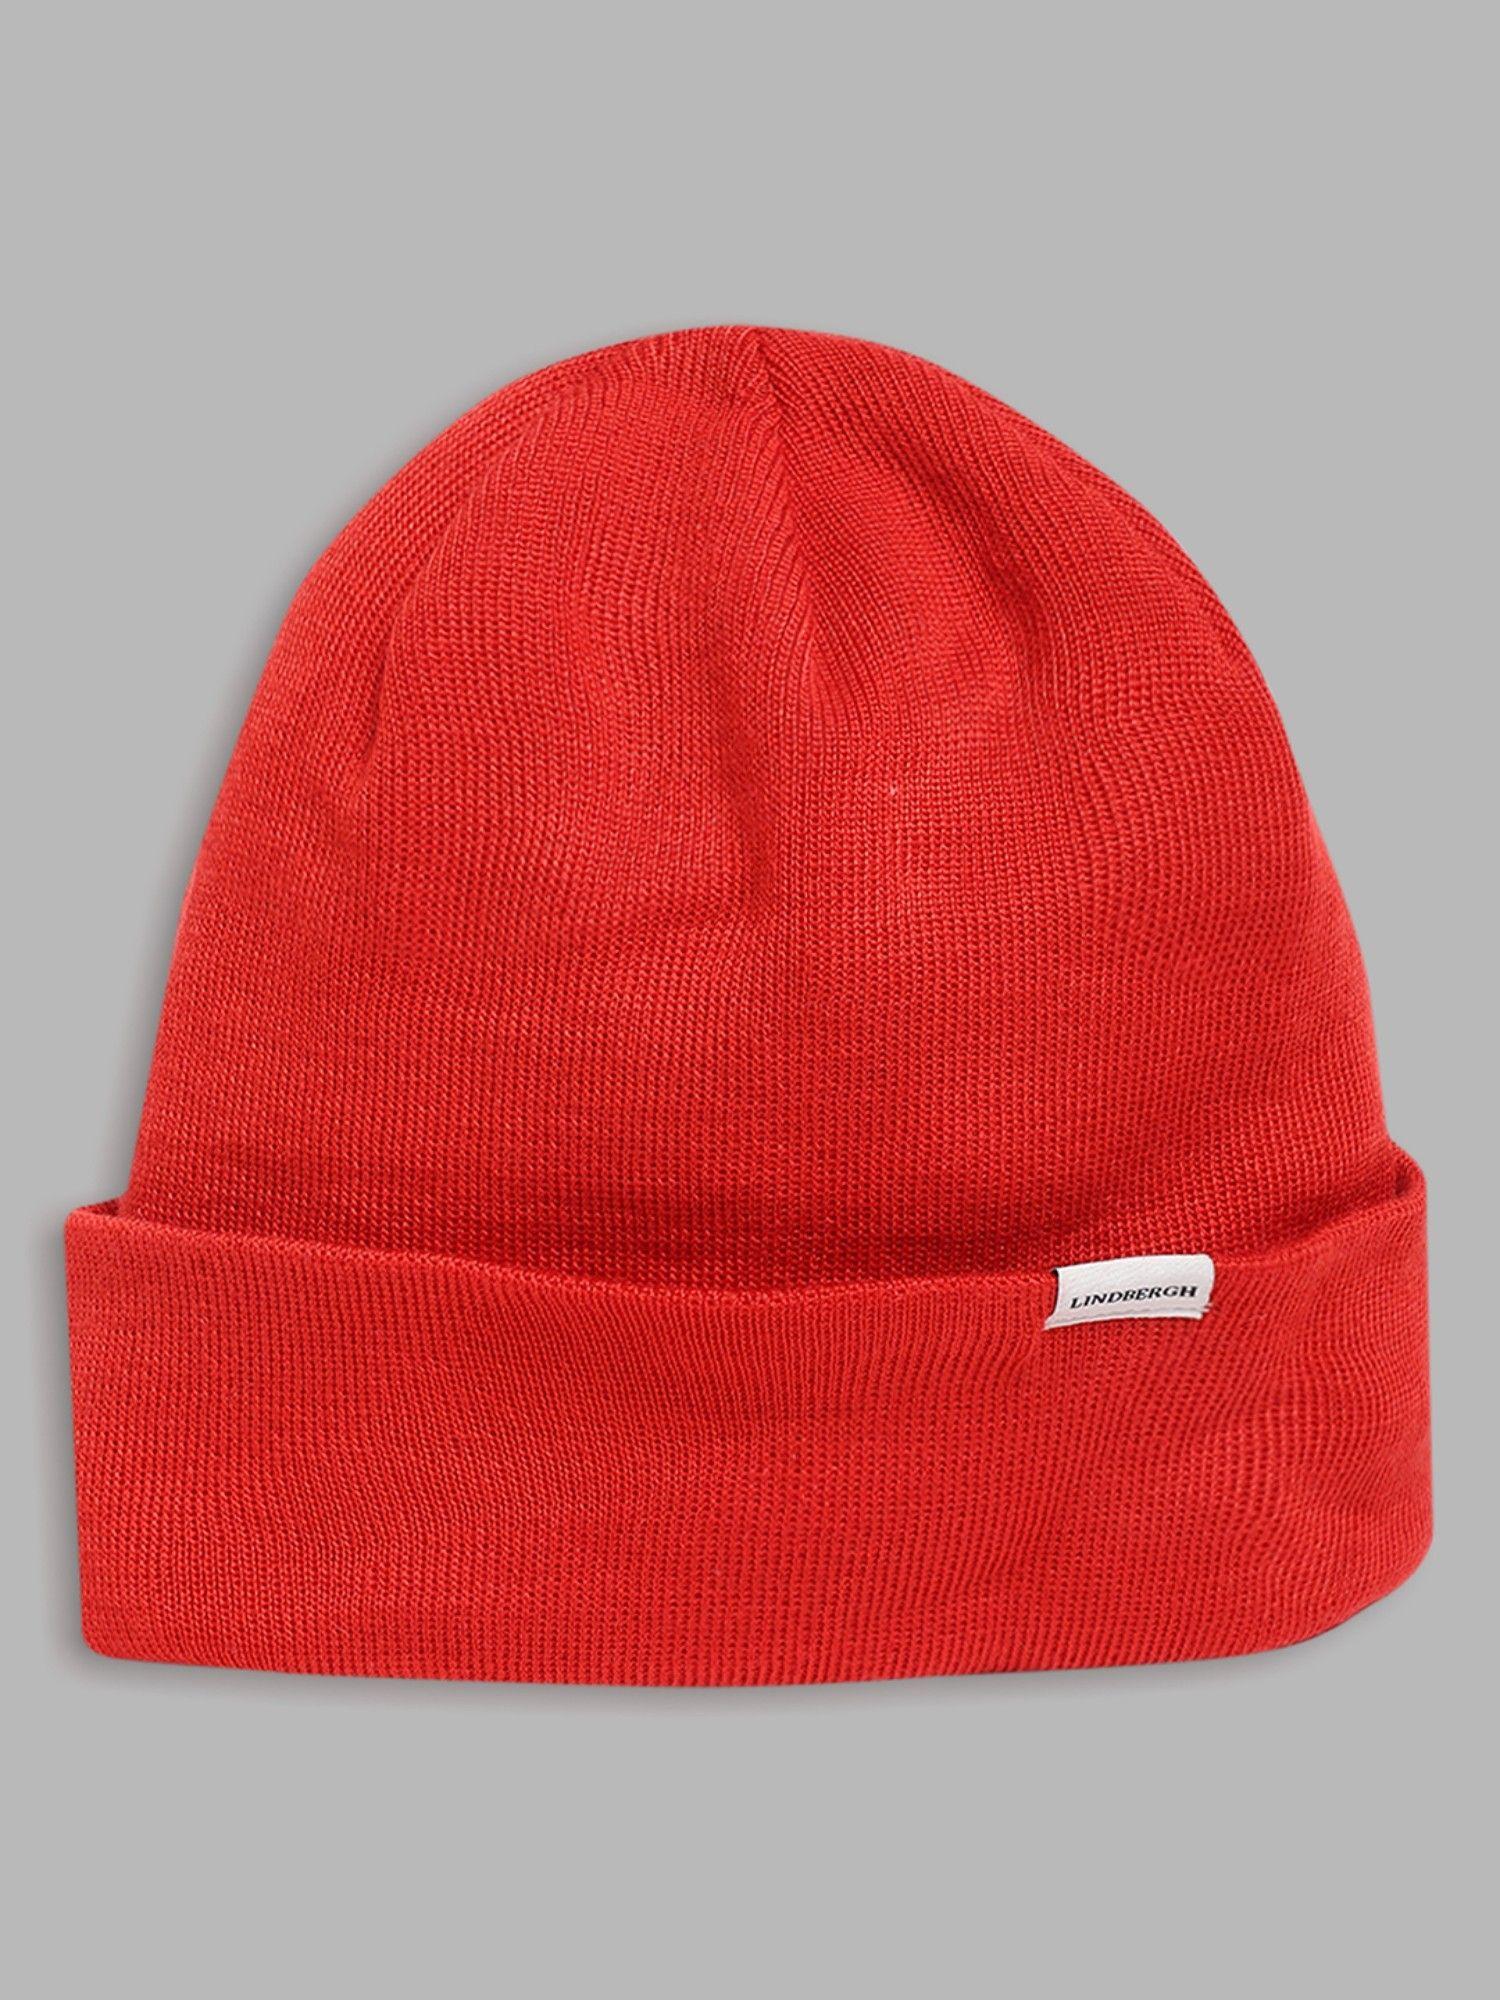 mens red woven beanie